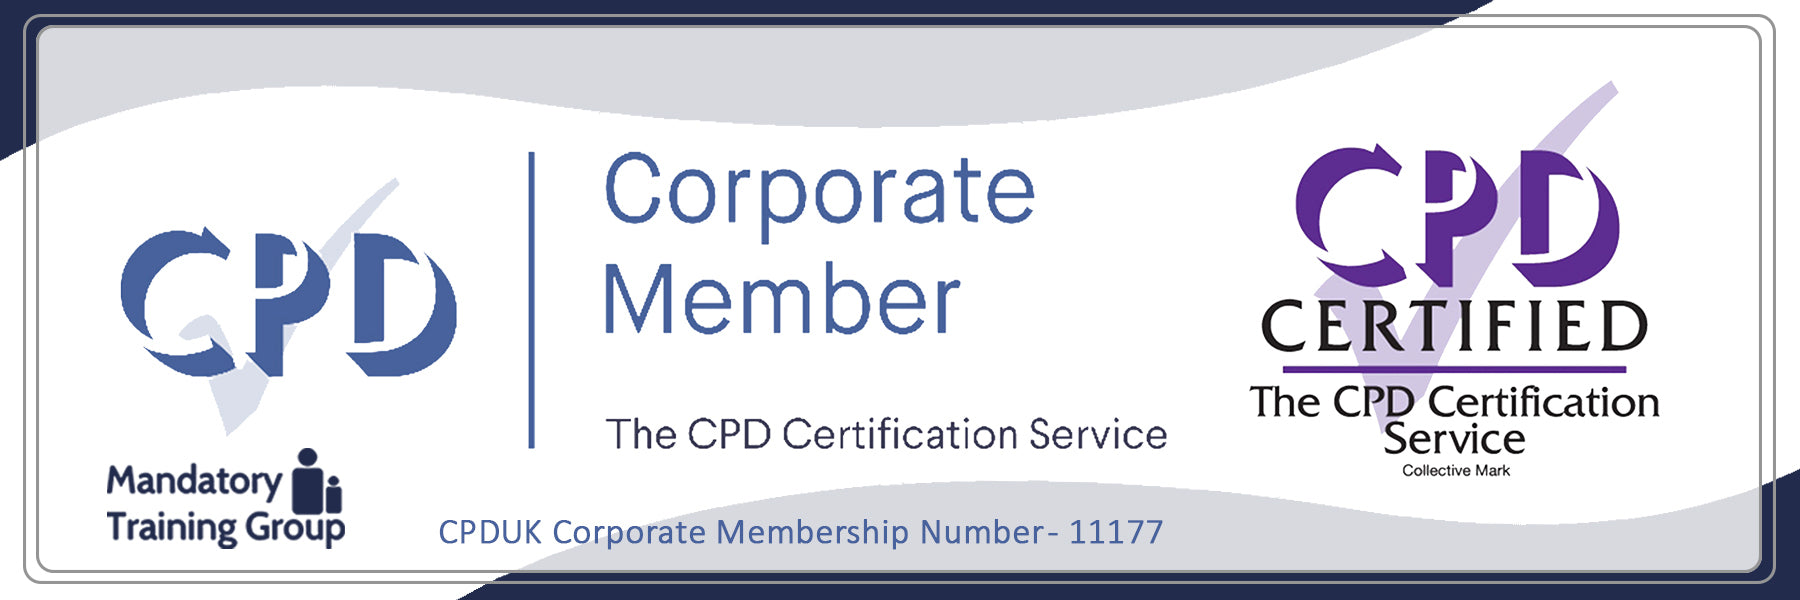 Care Certificate Standard 7 - Train the Trainer + Trainer Pack - Online CPD Course - The Mandatory Training Group UK - (2)